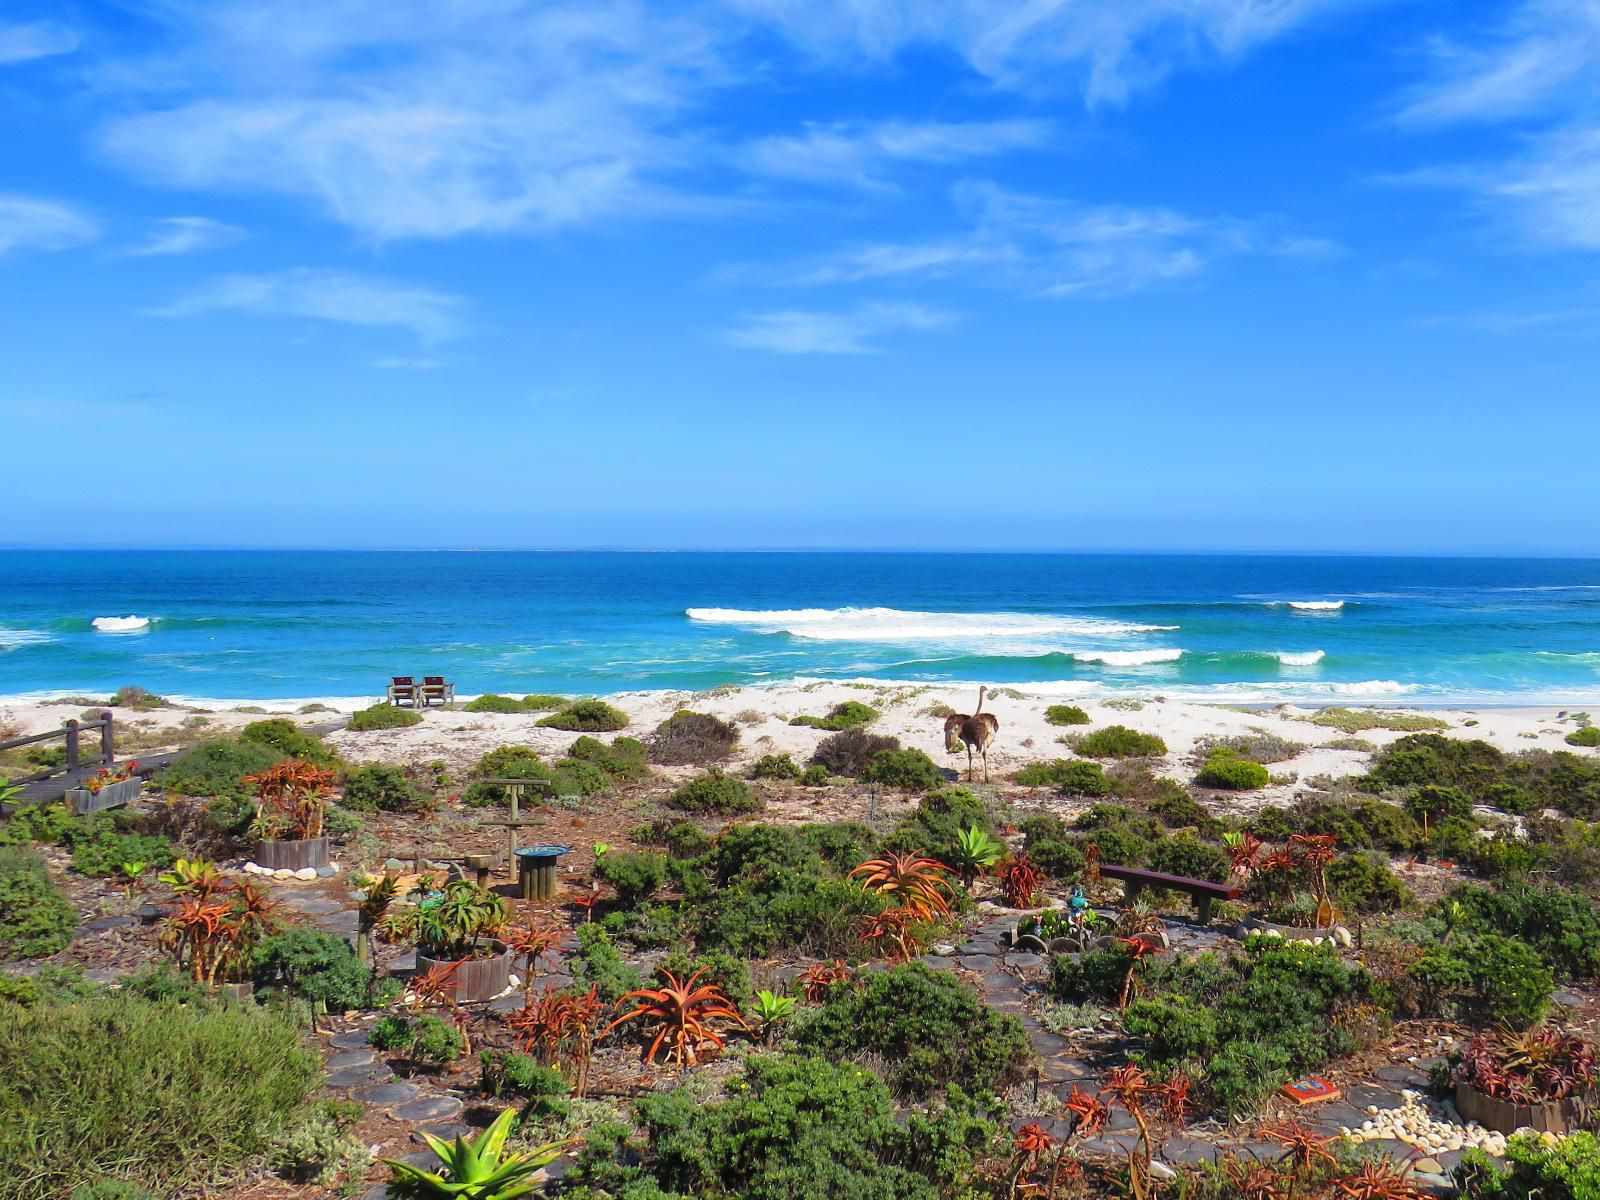 On The Beach Seabreeze Apartment Yzerfontein Western Cape South Africa Complementary Colors, Colorful, Beach, Nature, Sand, Ocean, Waters